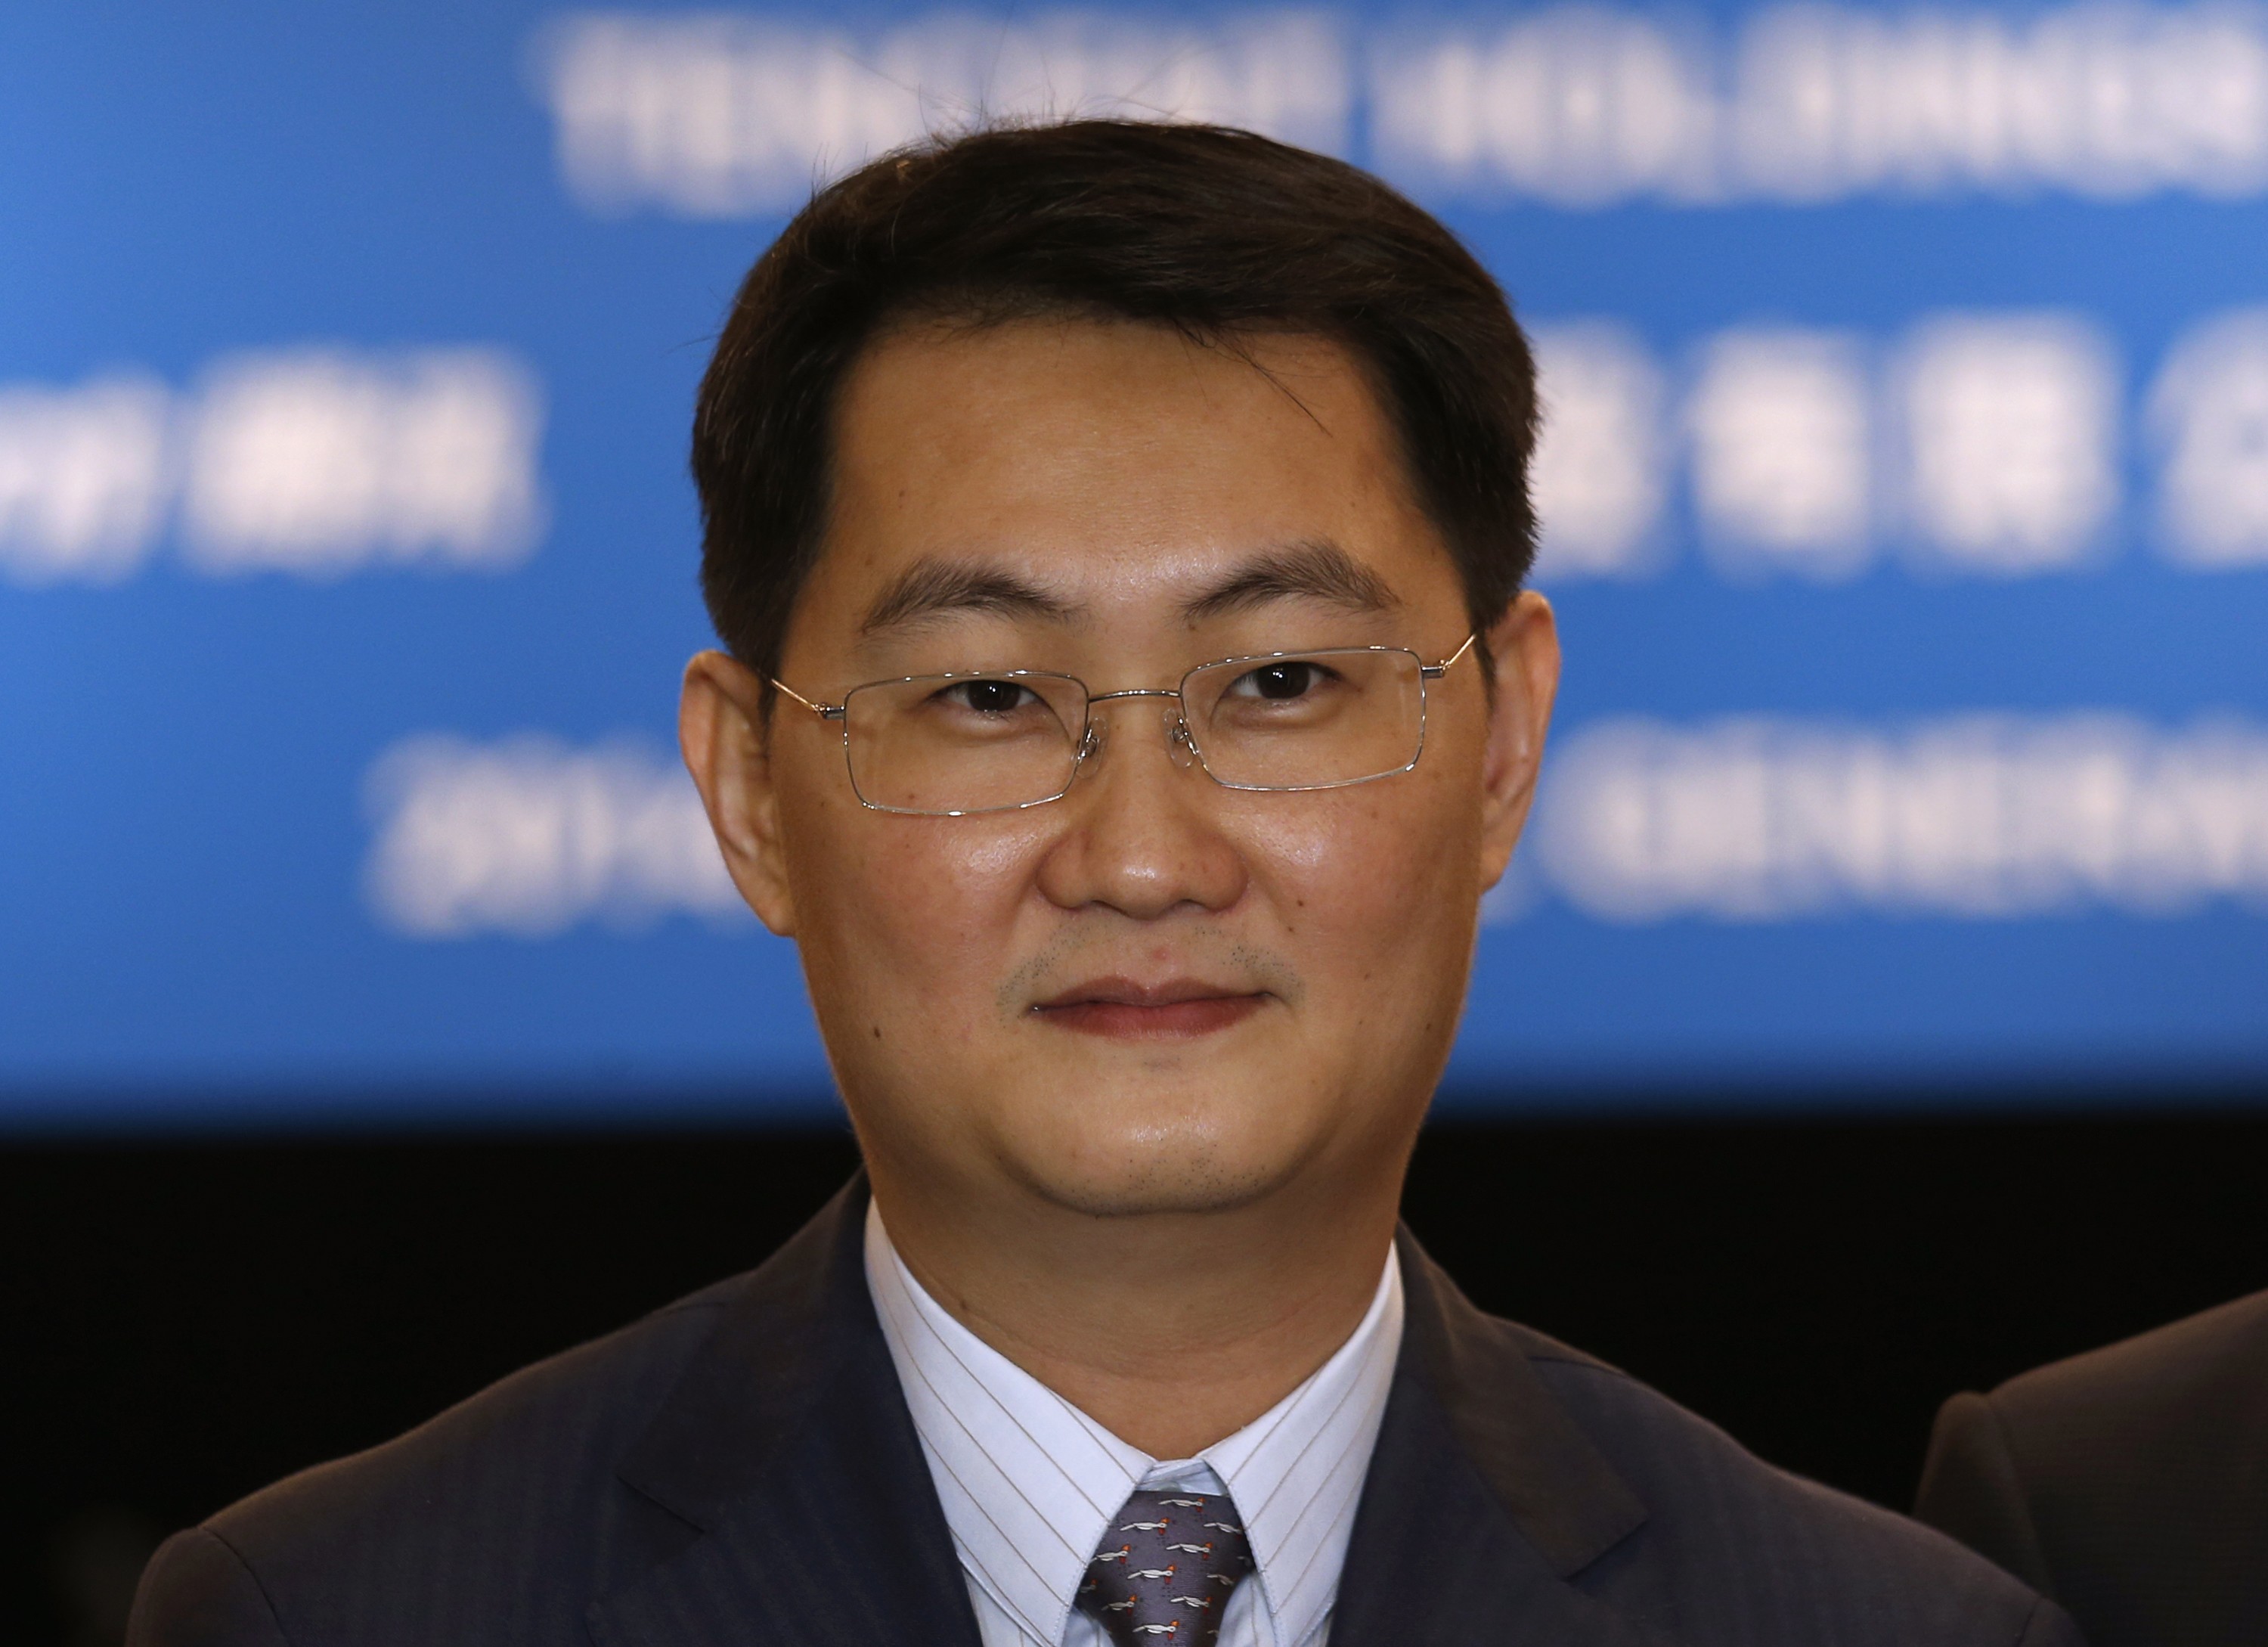 Tencent Chief Executive Officer Pony Ma poses before attending the company's annual general meeting in Hong Kong in this May 14, 2014 file photo. Alibaba and Tencent spent more than $8 billion last year alone backing often strikingly similar ventures, as the Chinese Internet giants race to create online one-stop-shops to win the digital loyalty of a tenth of the world's population. REUTERS/Bobby Yip/Files (CHINA - Tags: BUSINESS HEADSHOT TELECOMS SCIENCE TECHNOLOGY)